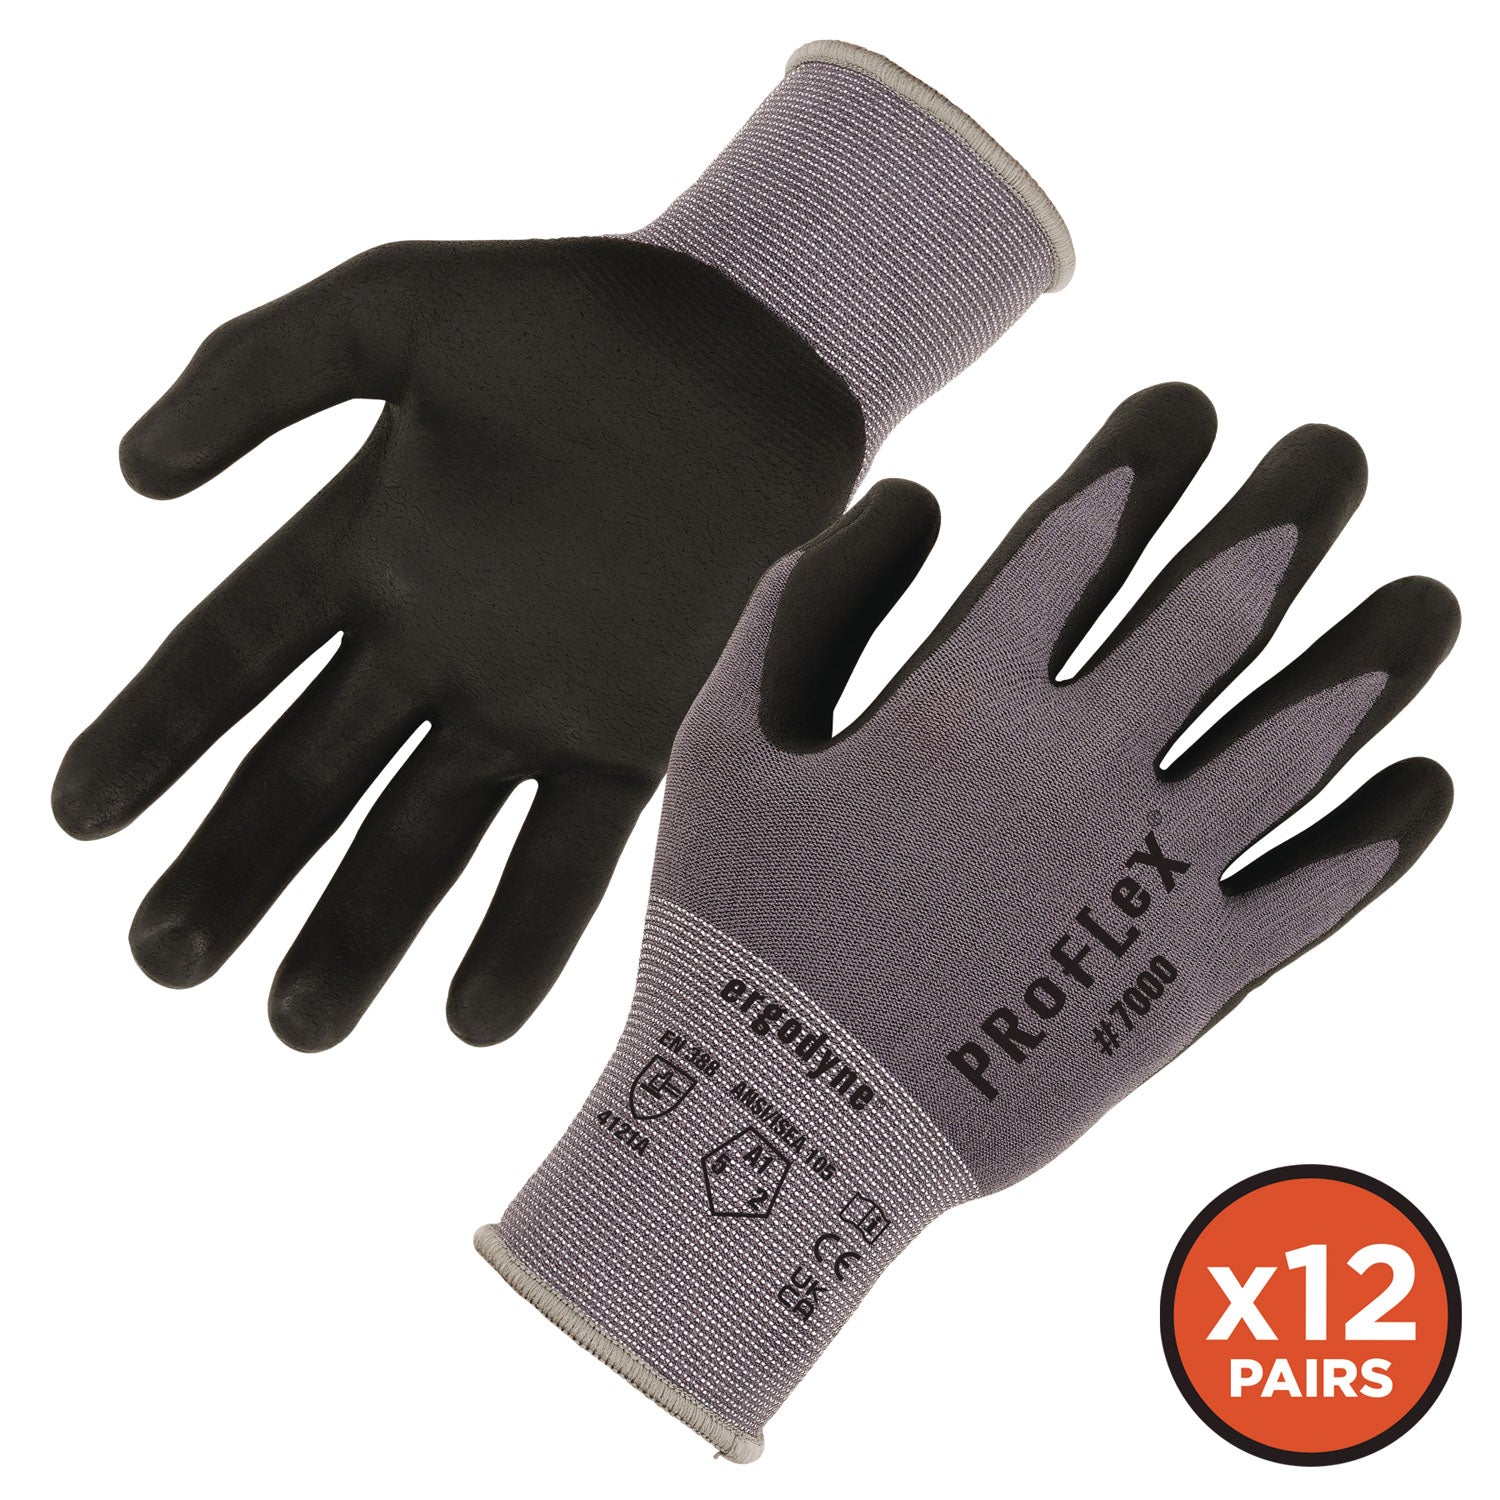 proflex-7000-nitrile-coated-gloves-microfoam-palm-gray-x-small-12-pairs-pack-ships-in-1-3-business-days_ego10361 - 2